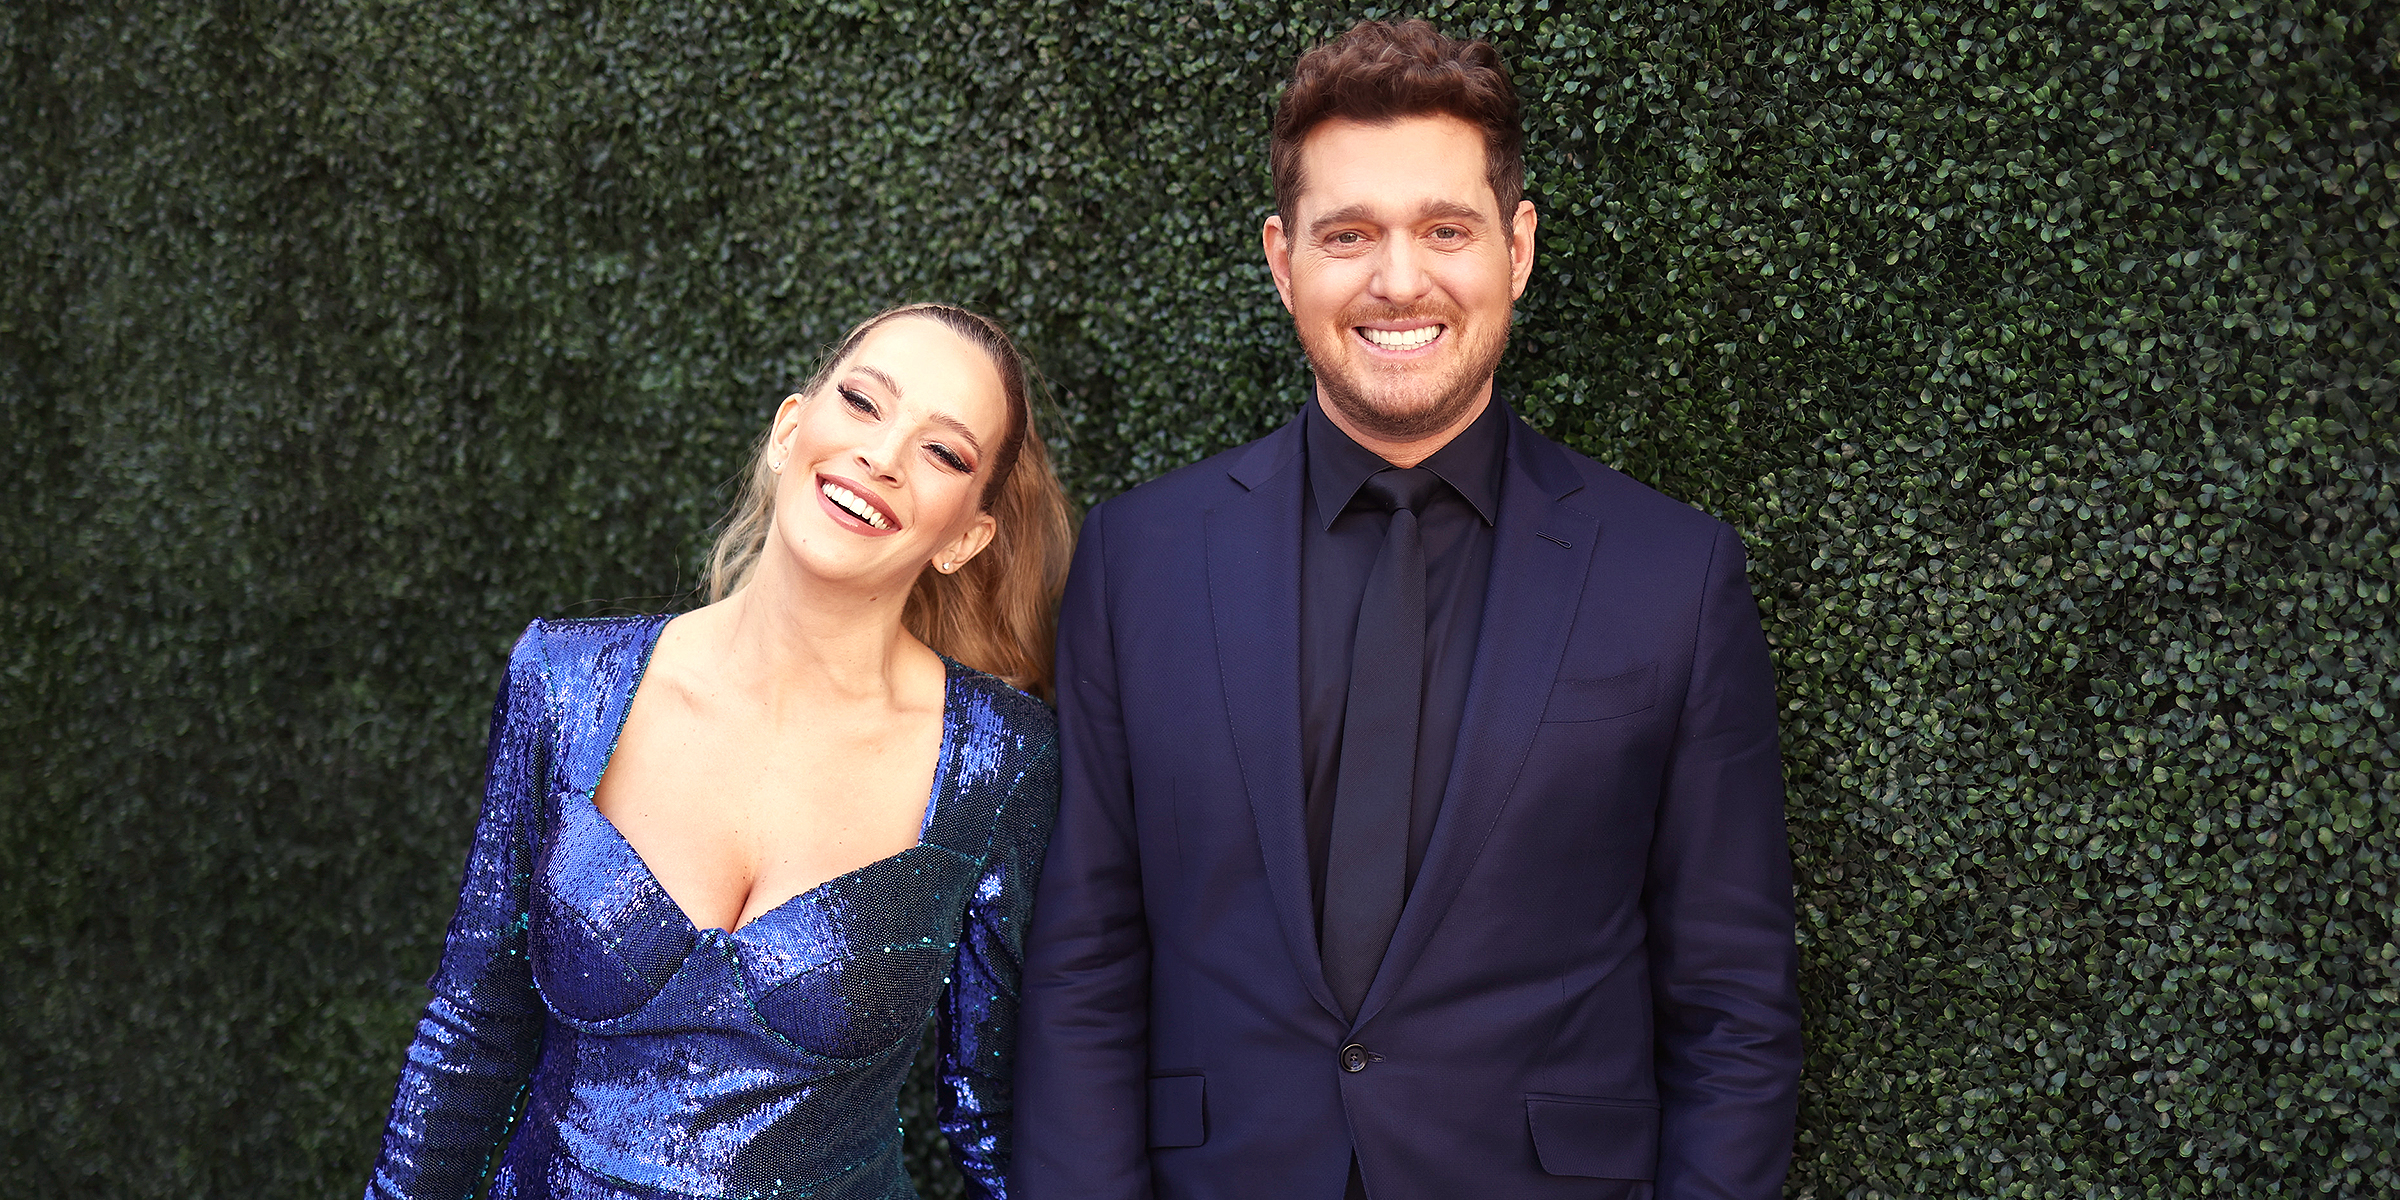 Michael Bublé and Luisana Loreley | Source: Getty Images